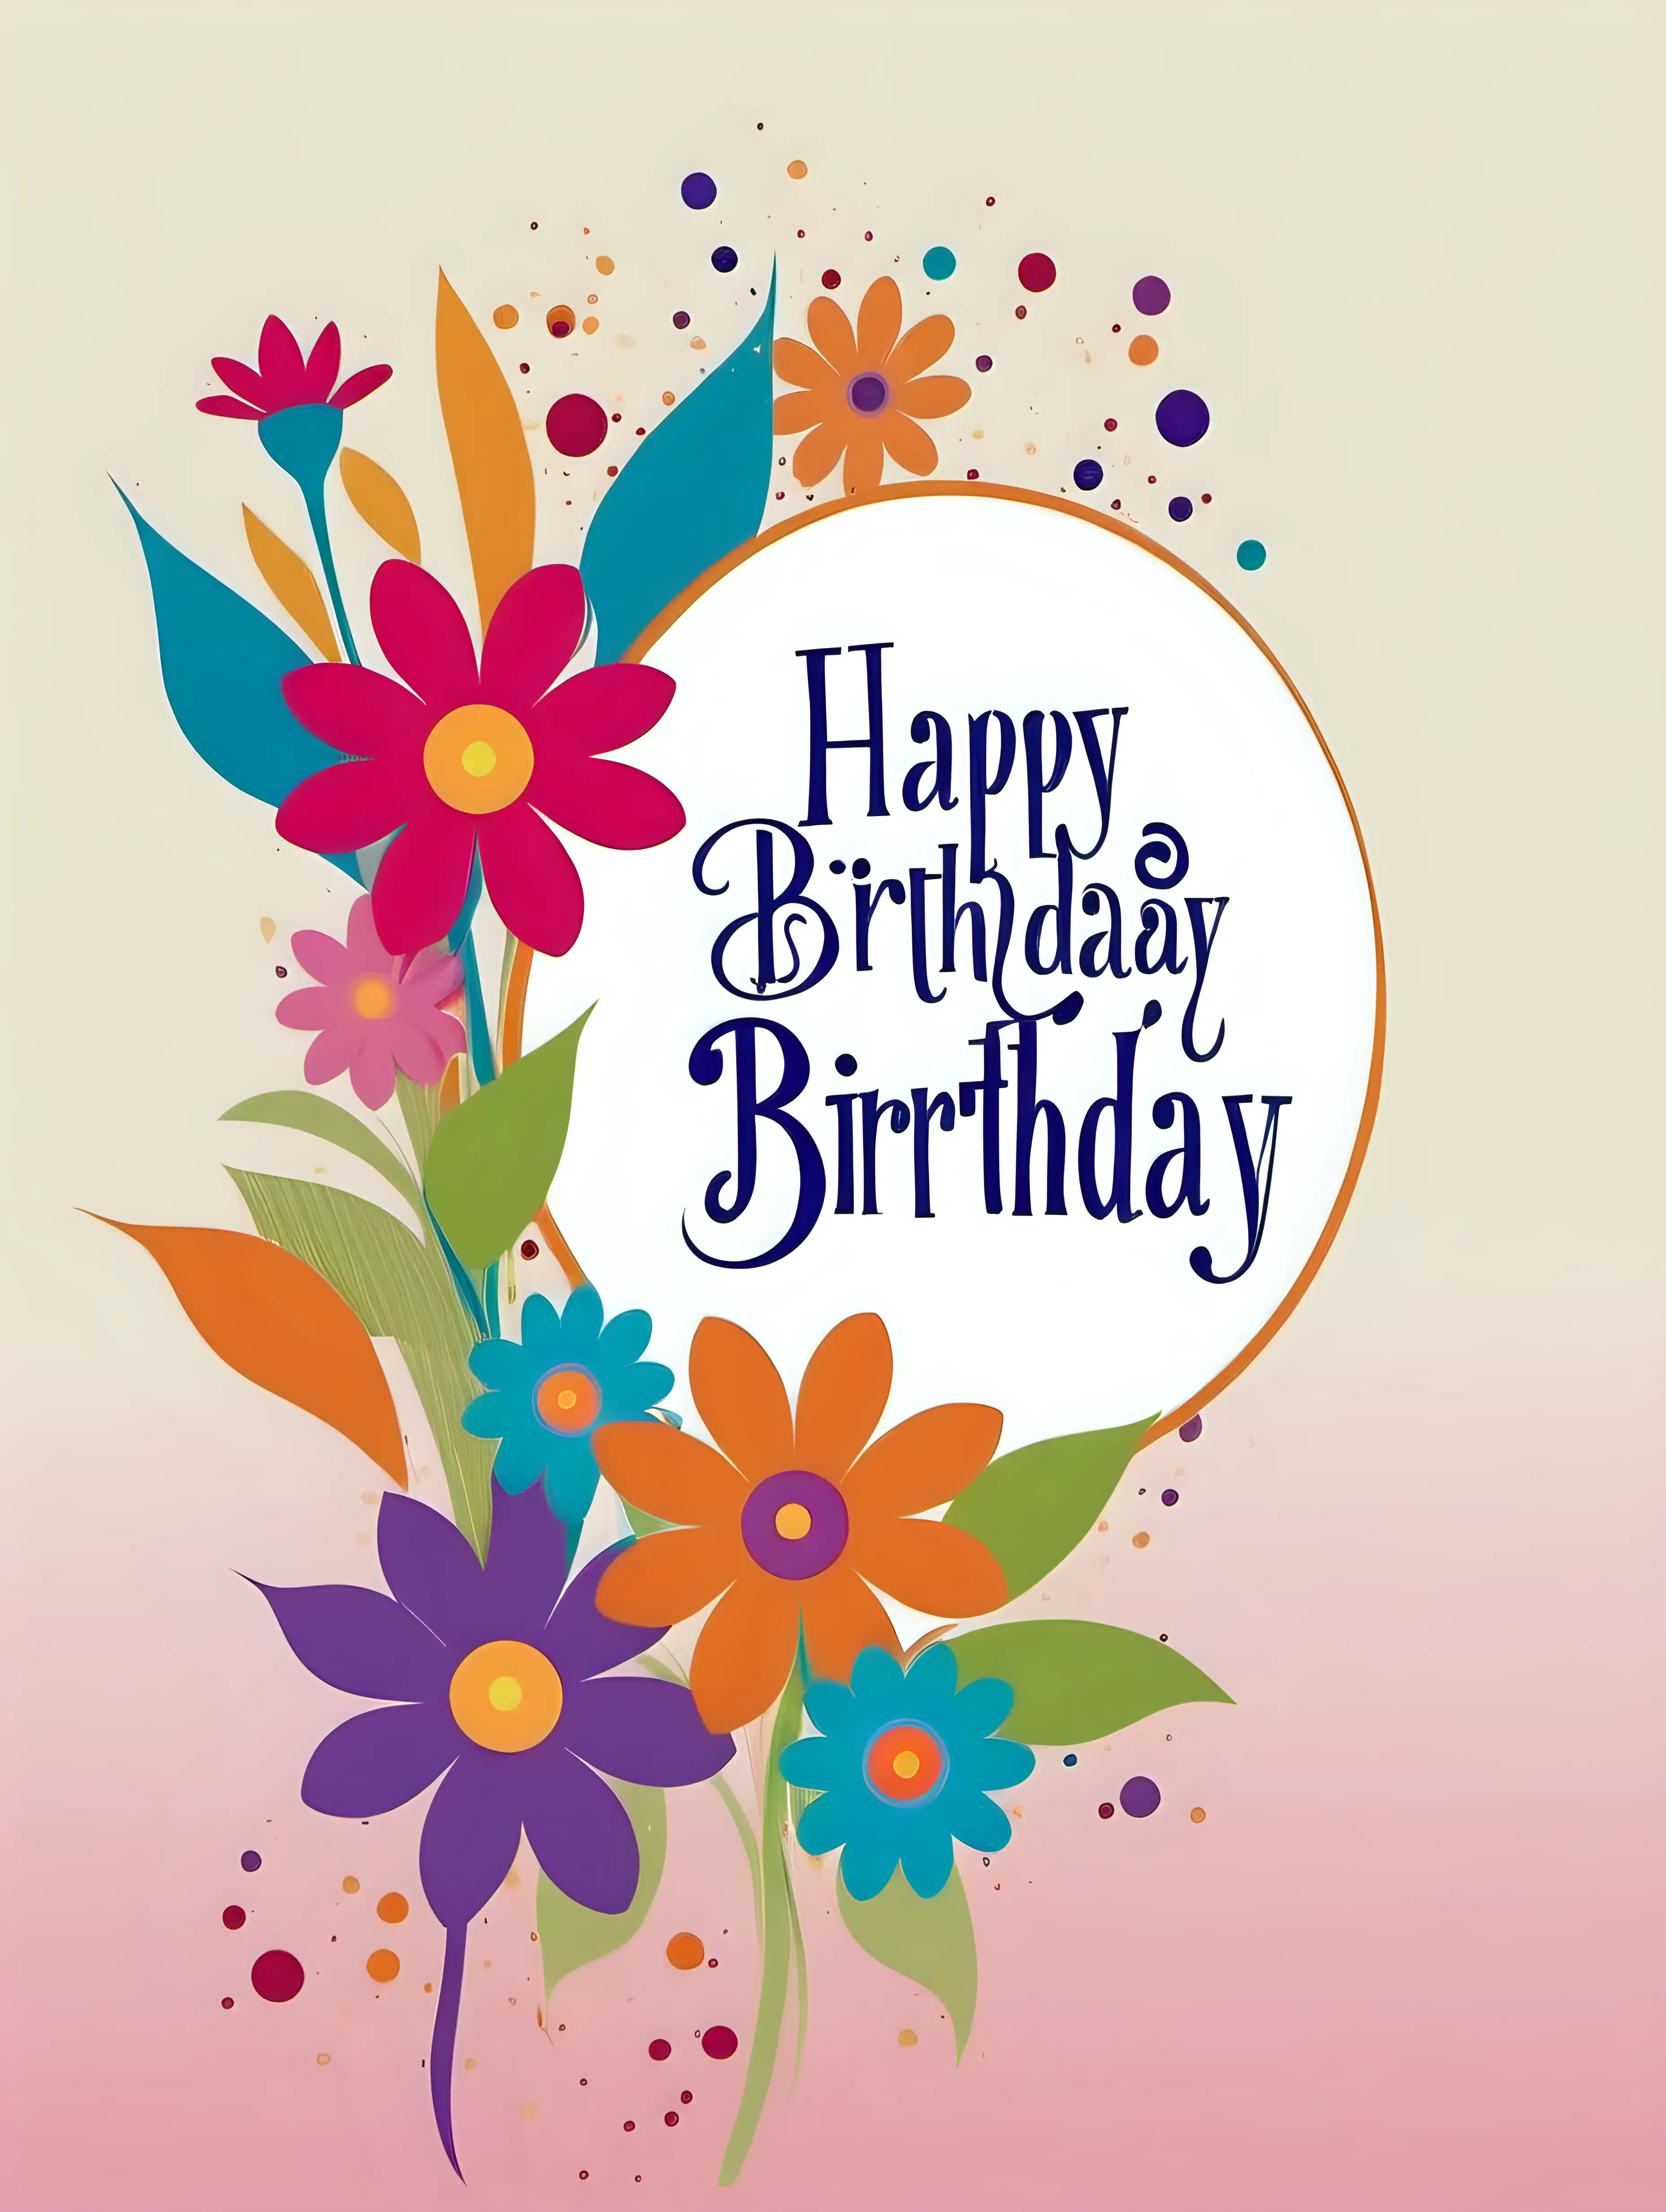 Vibrant Floral Birthday Greeting Card Design with Customizable Text